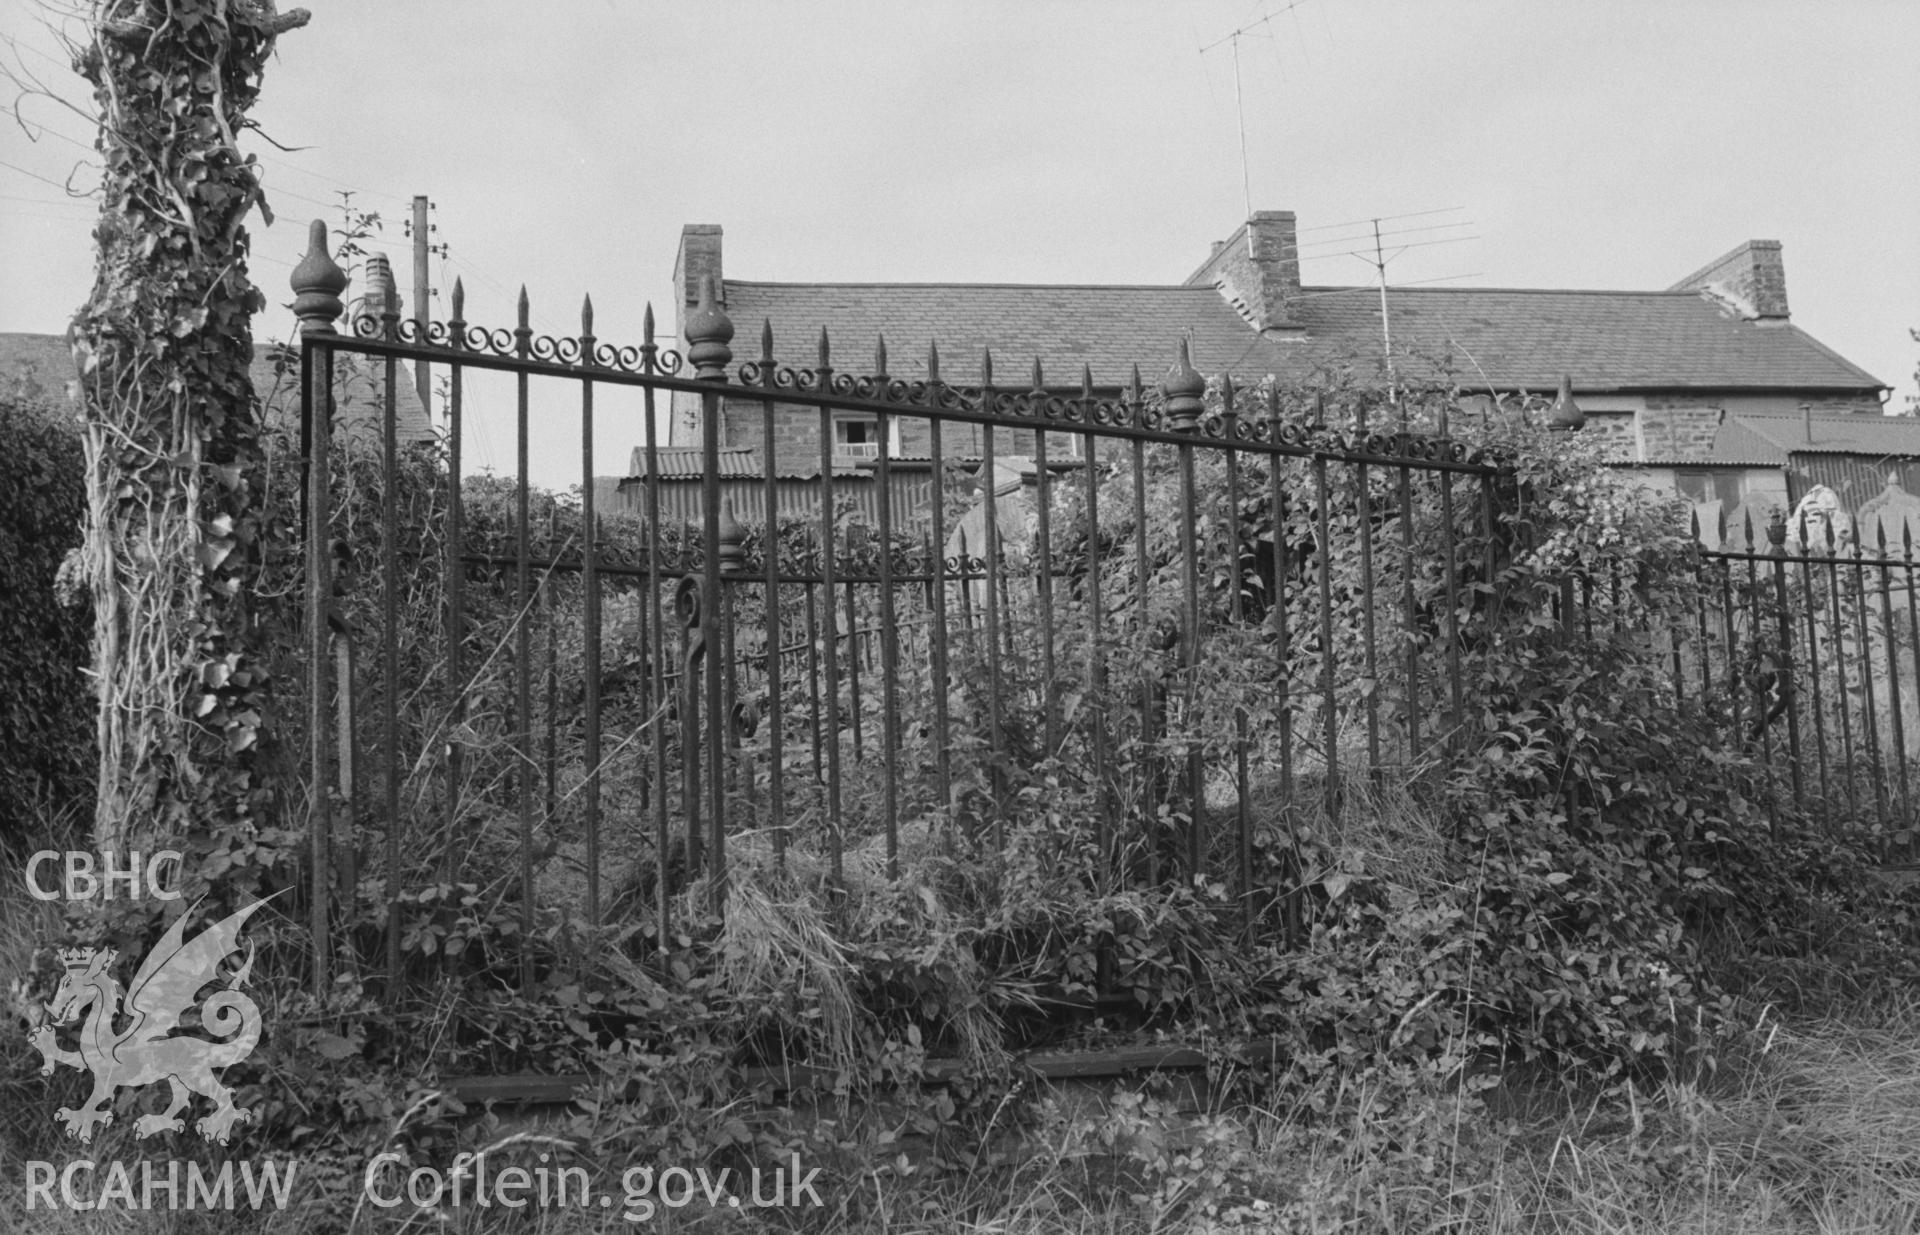 Digital copy of black & white negative showing wrought iron railings around graves in old churchyard at Holy Cross church, Llechryd, south east of Cardigan. Photographed by Arthur O. Chater in September 1964 from Grid Reference SN 2184 4372, looking north.